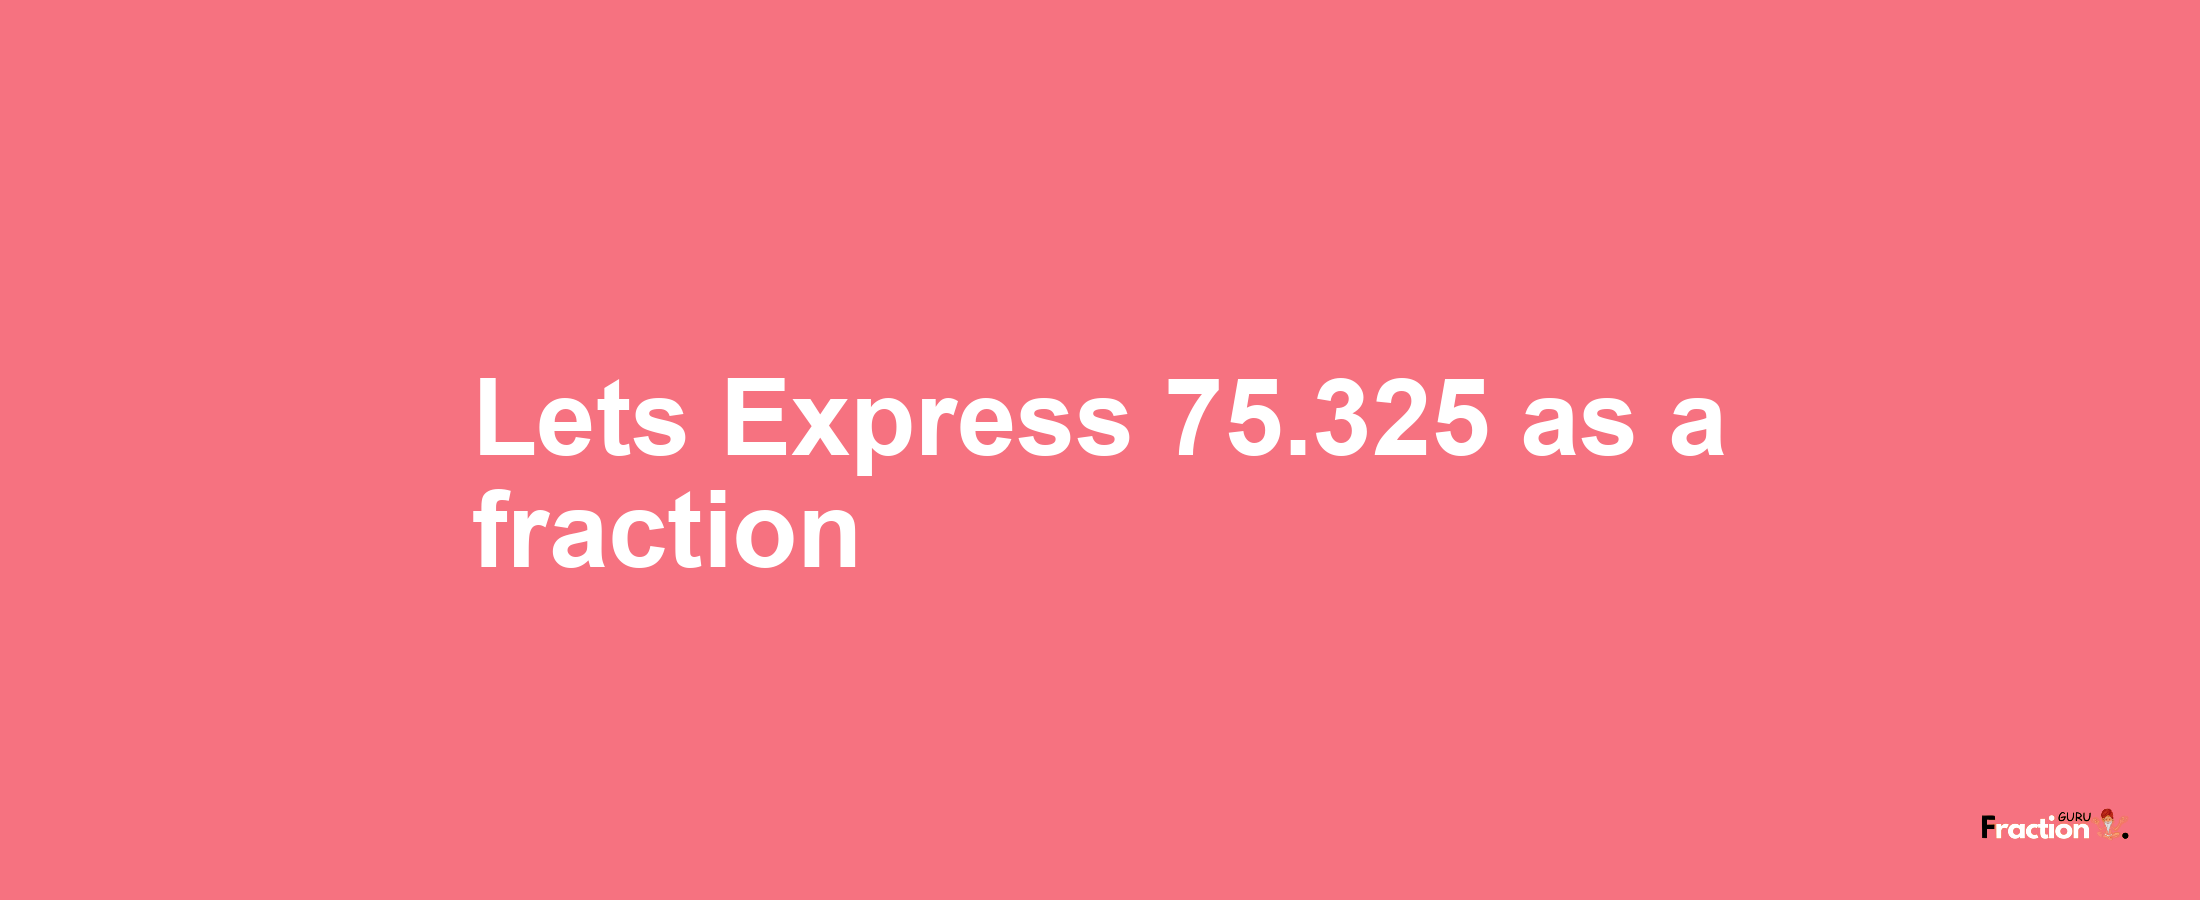 Lets Express 75.325 as afraction